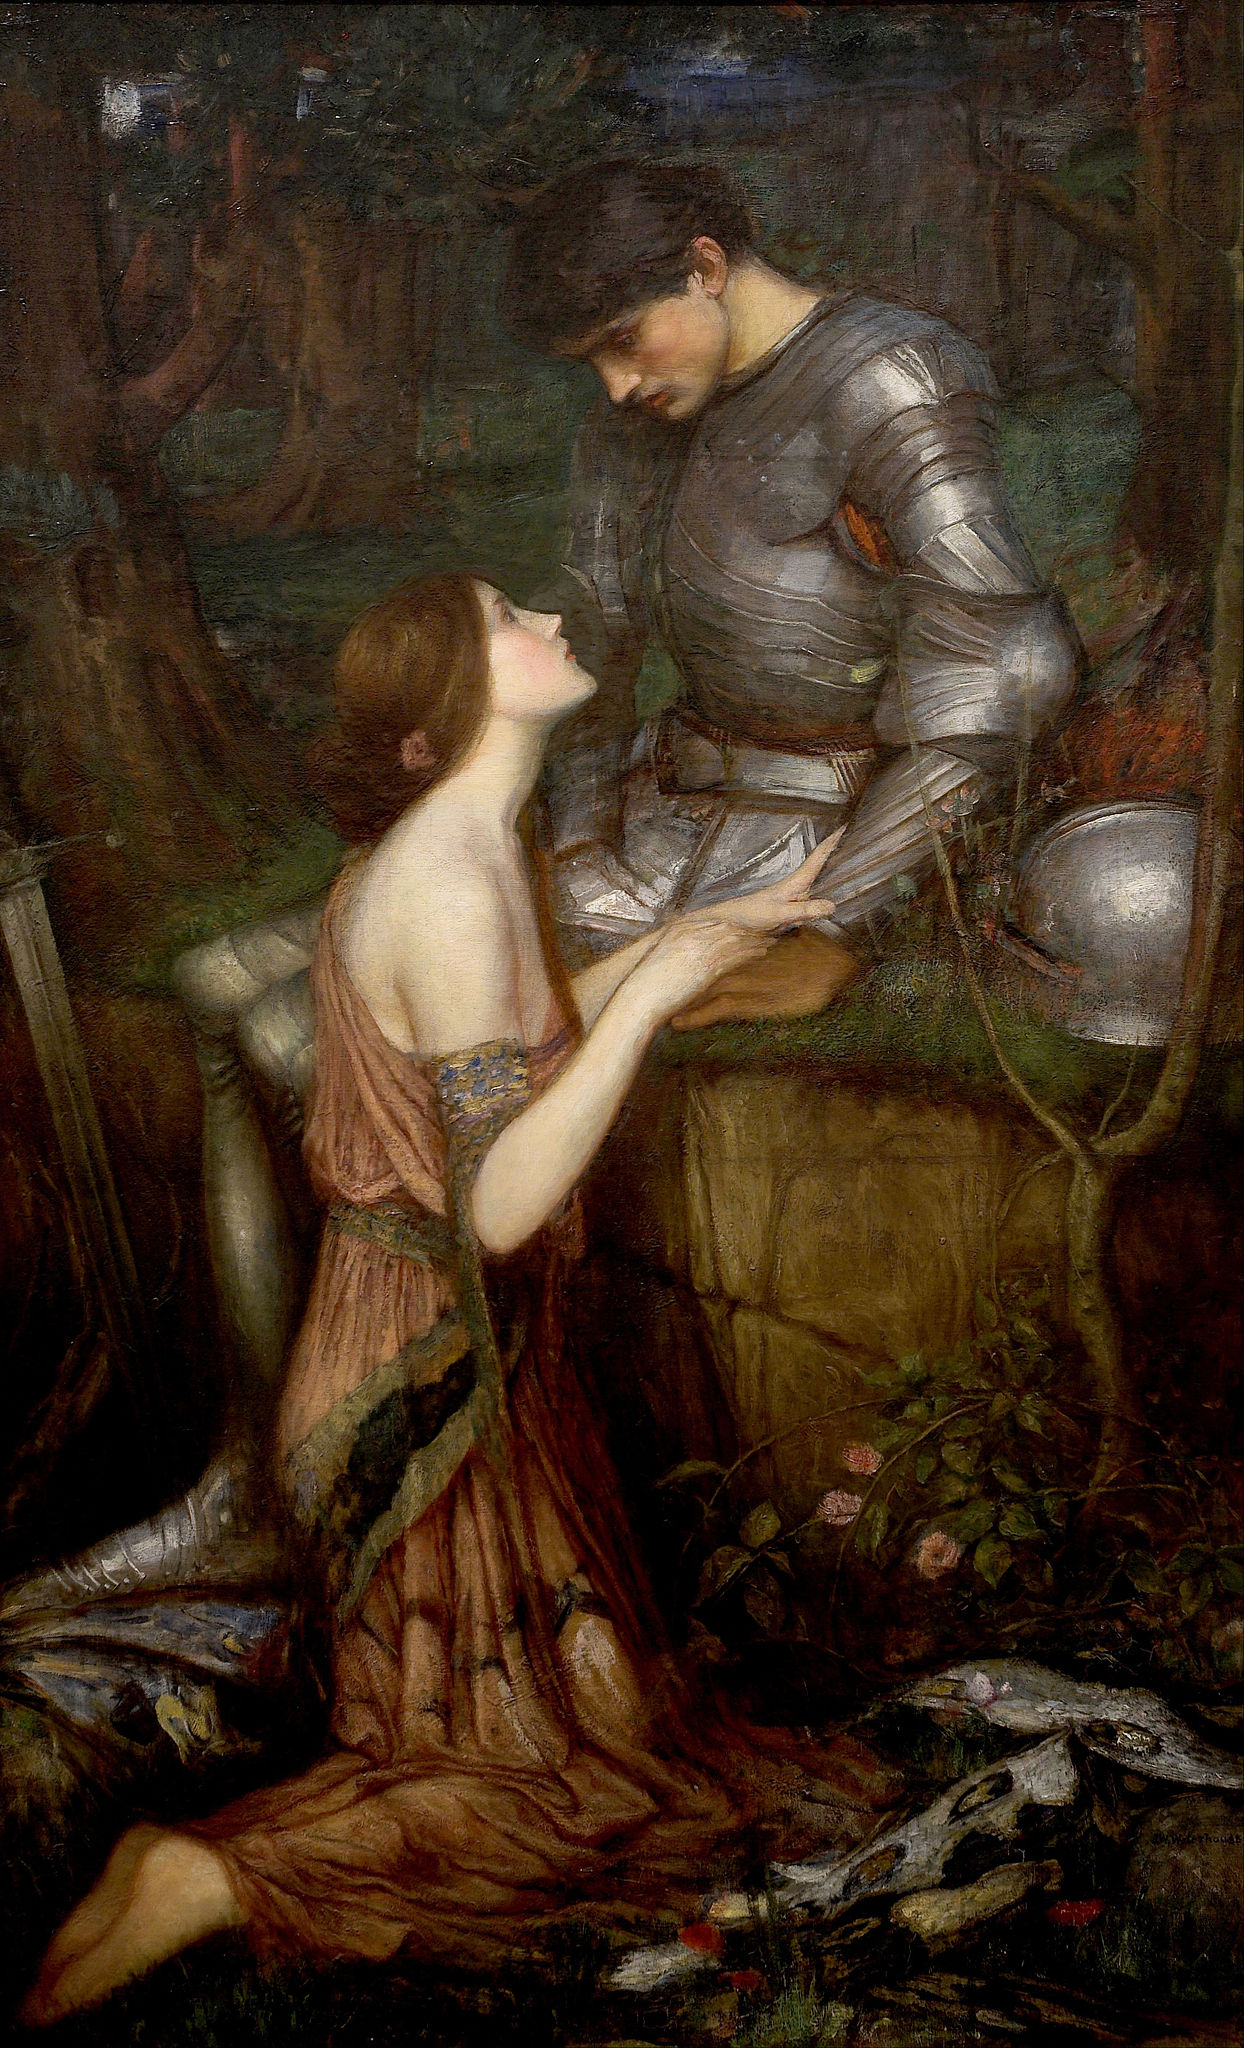 Lamia and the Soldier (1905). Oil on canvas, 144.7 x 90.2 cm (56.9 x 35.5 in). Auckland Art Gallery, New Zealand